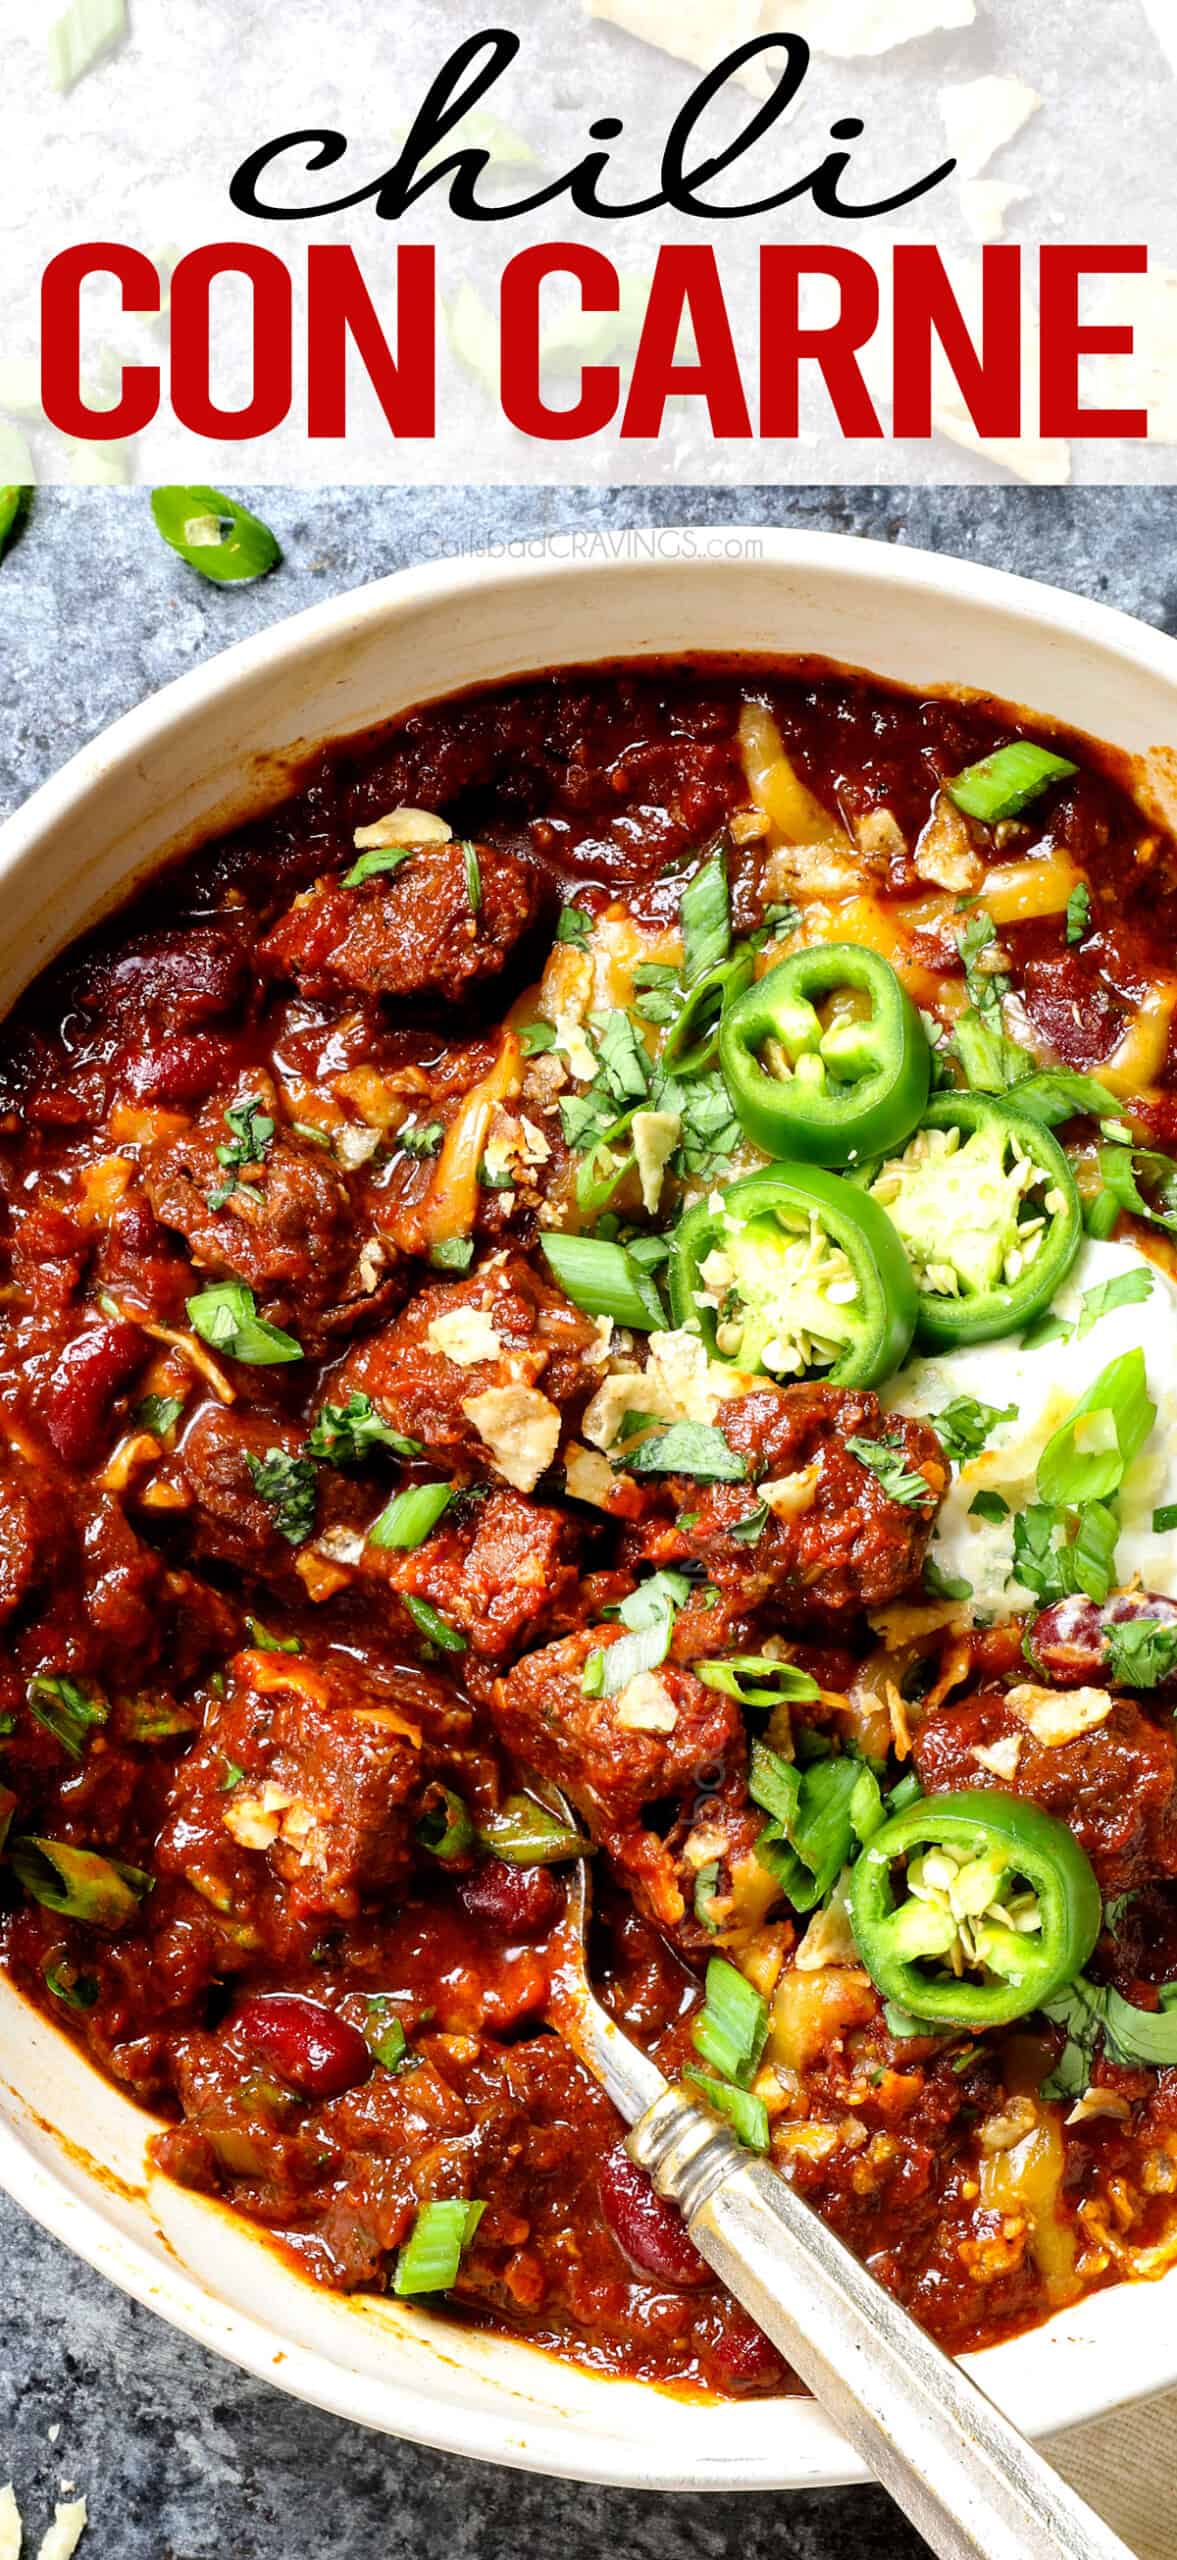 top view of chili con carne (beef chili) in a bowl with toppings